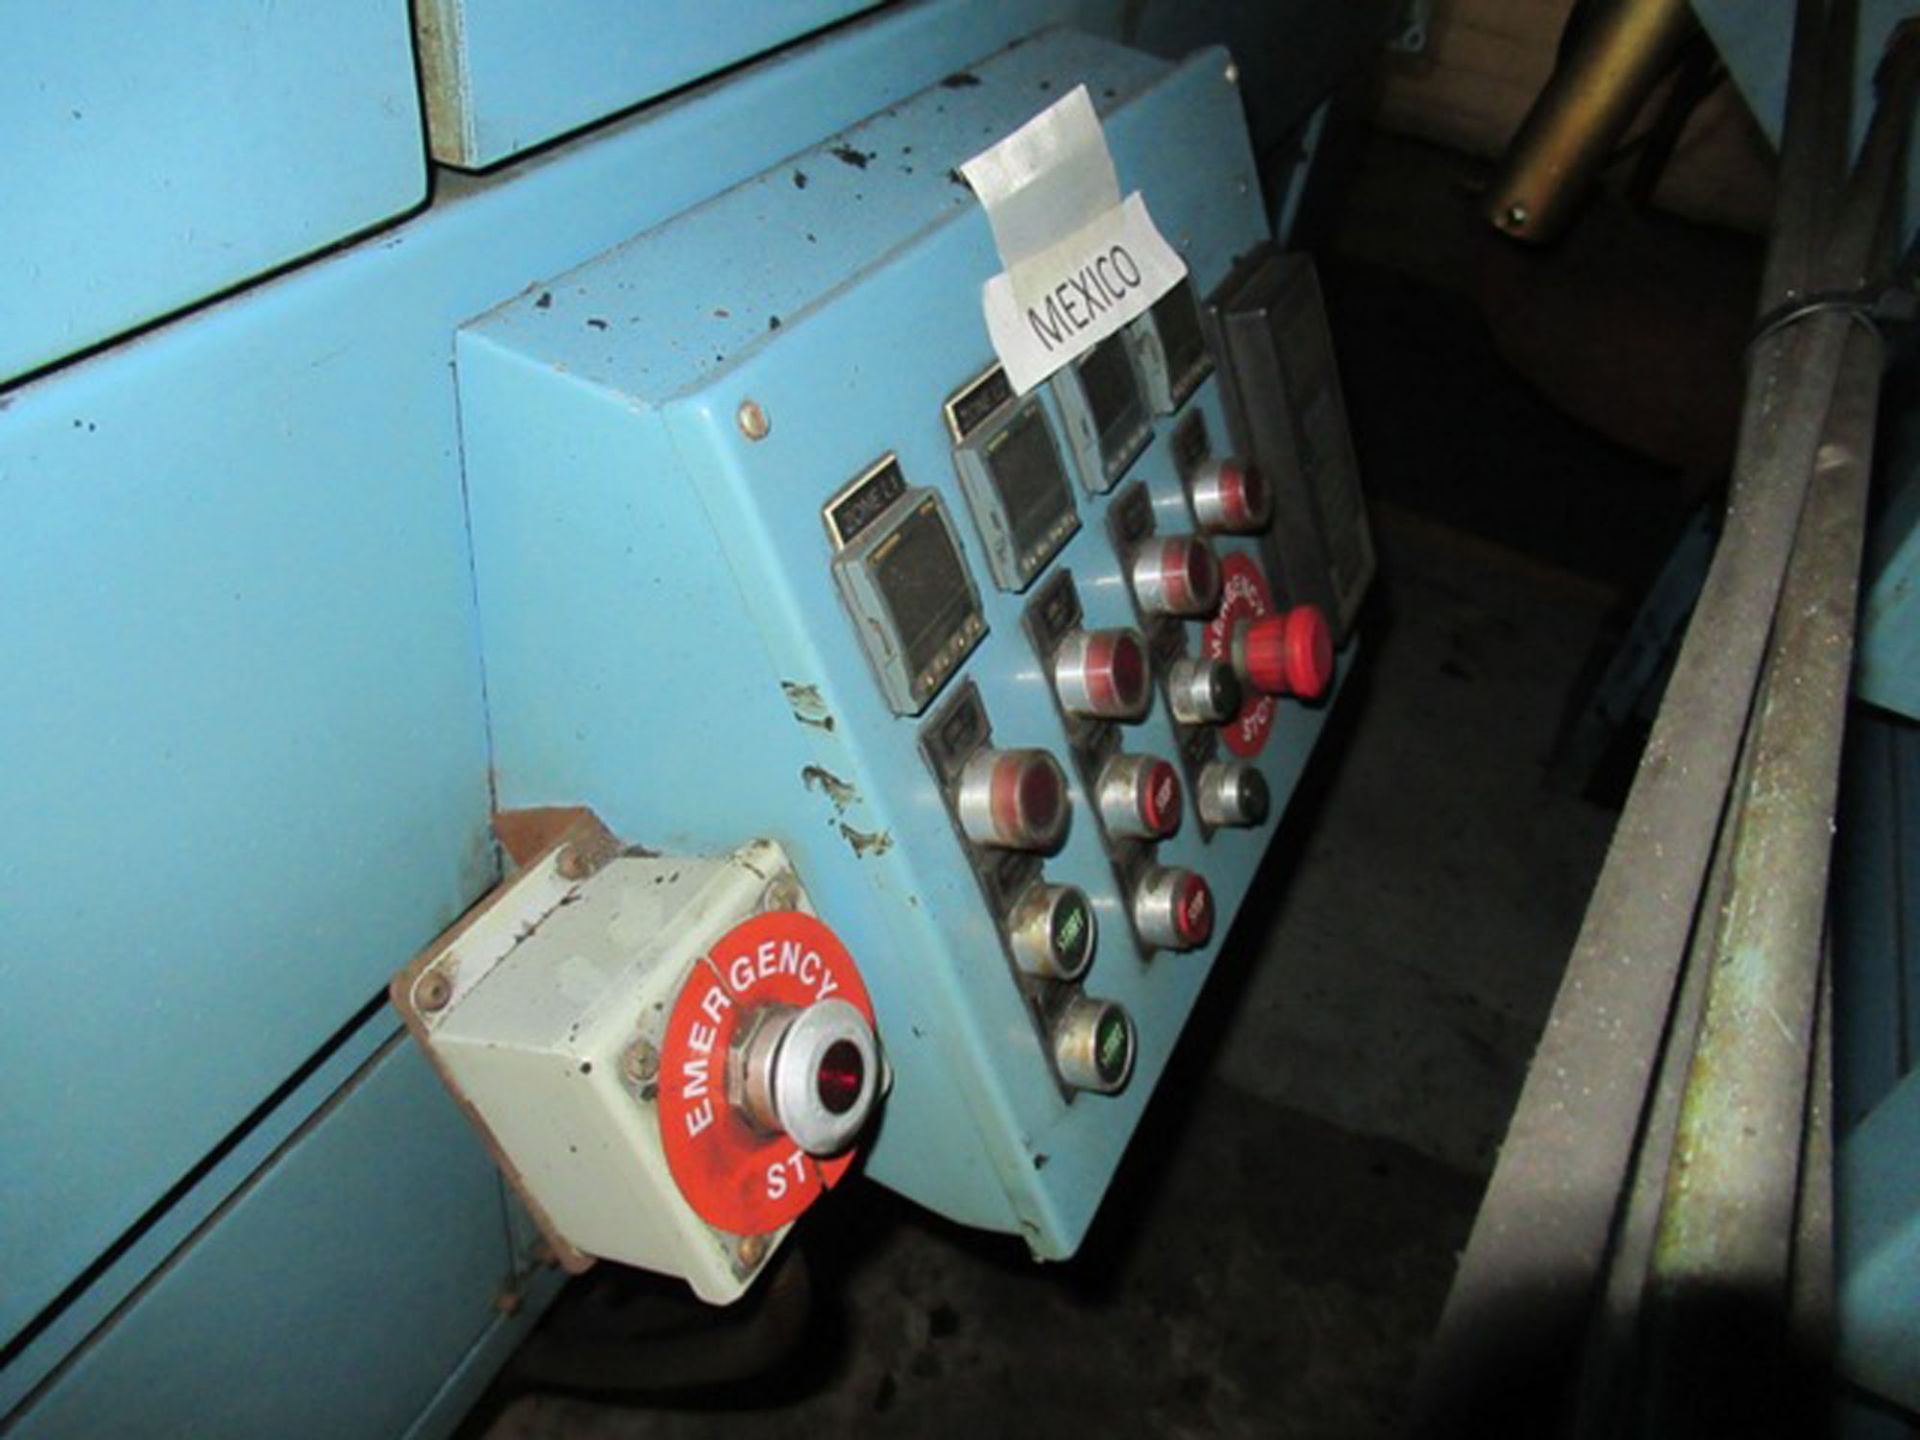 GERLACH 3M OVEN LINE CONTROL UNIT WITH 8" X 4" PART OPENING, ELECTRICAL CABINET, PUSHBUTTON CONTROLS - Image 4 of 5